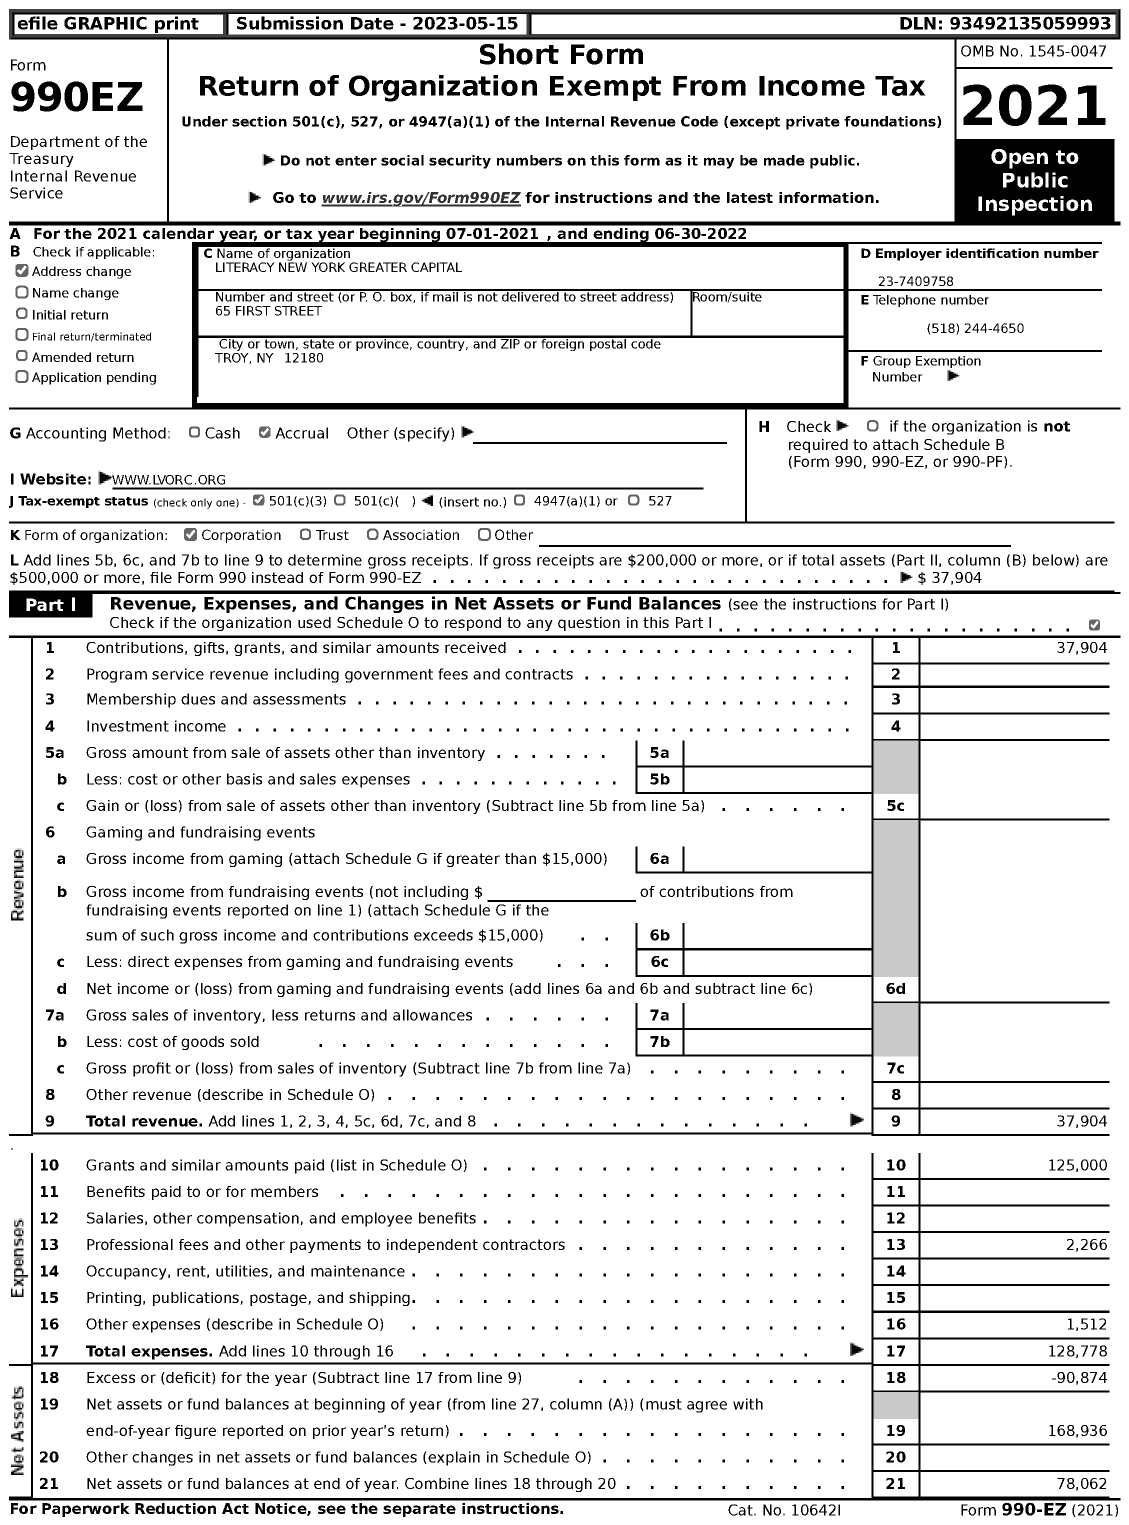 Image of first page of 2021 Form 990EZ for Literacy New York Greater Capital